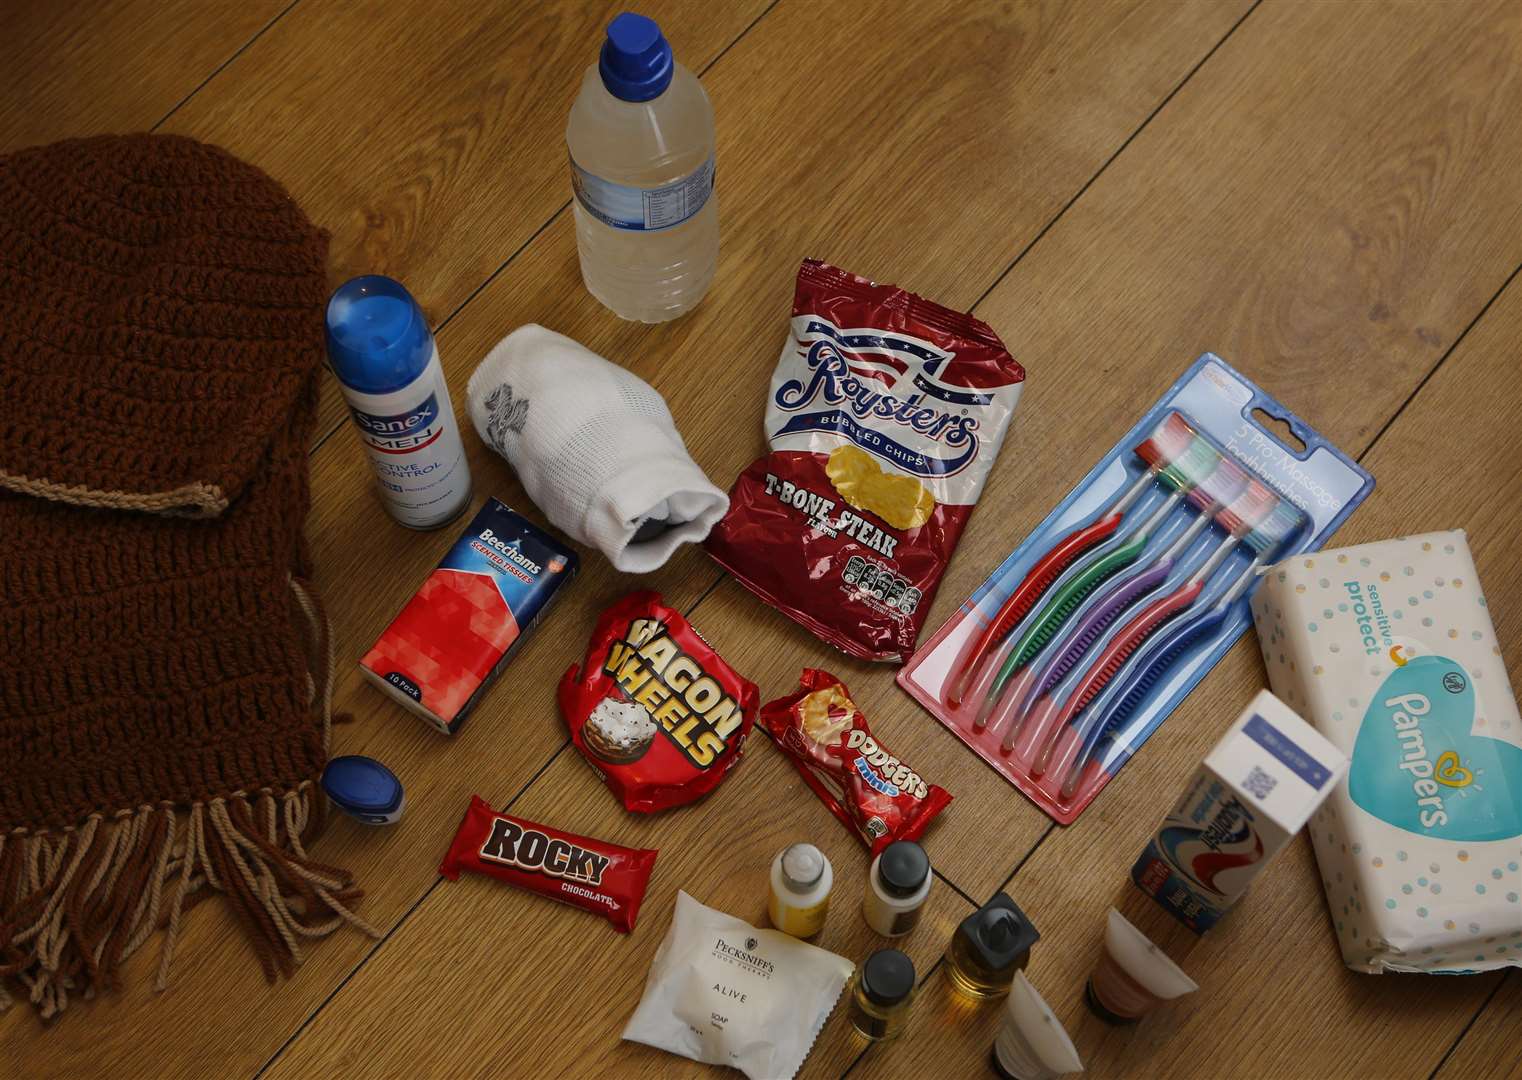 The contents of one of Brendan's kits